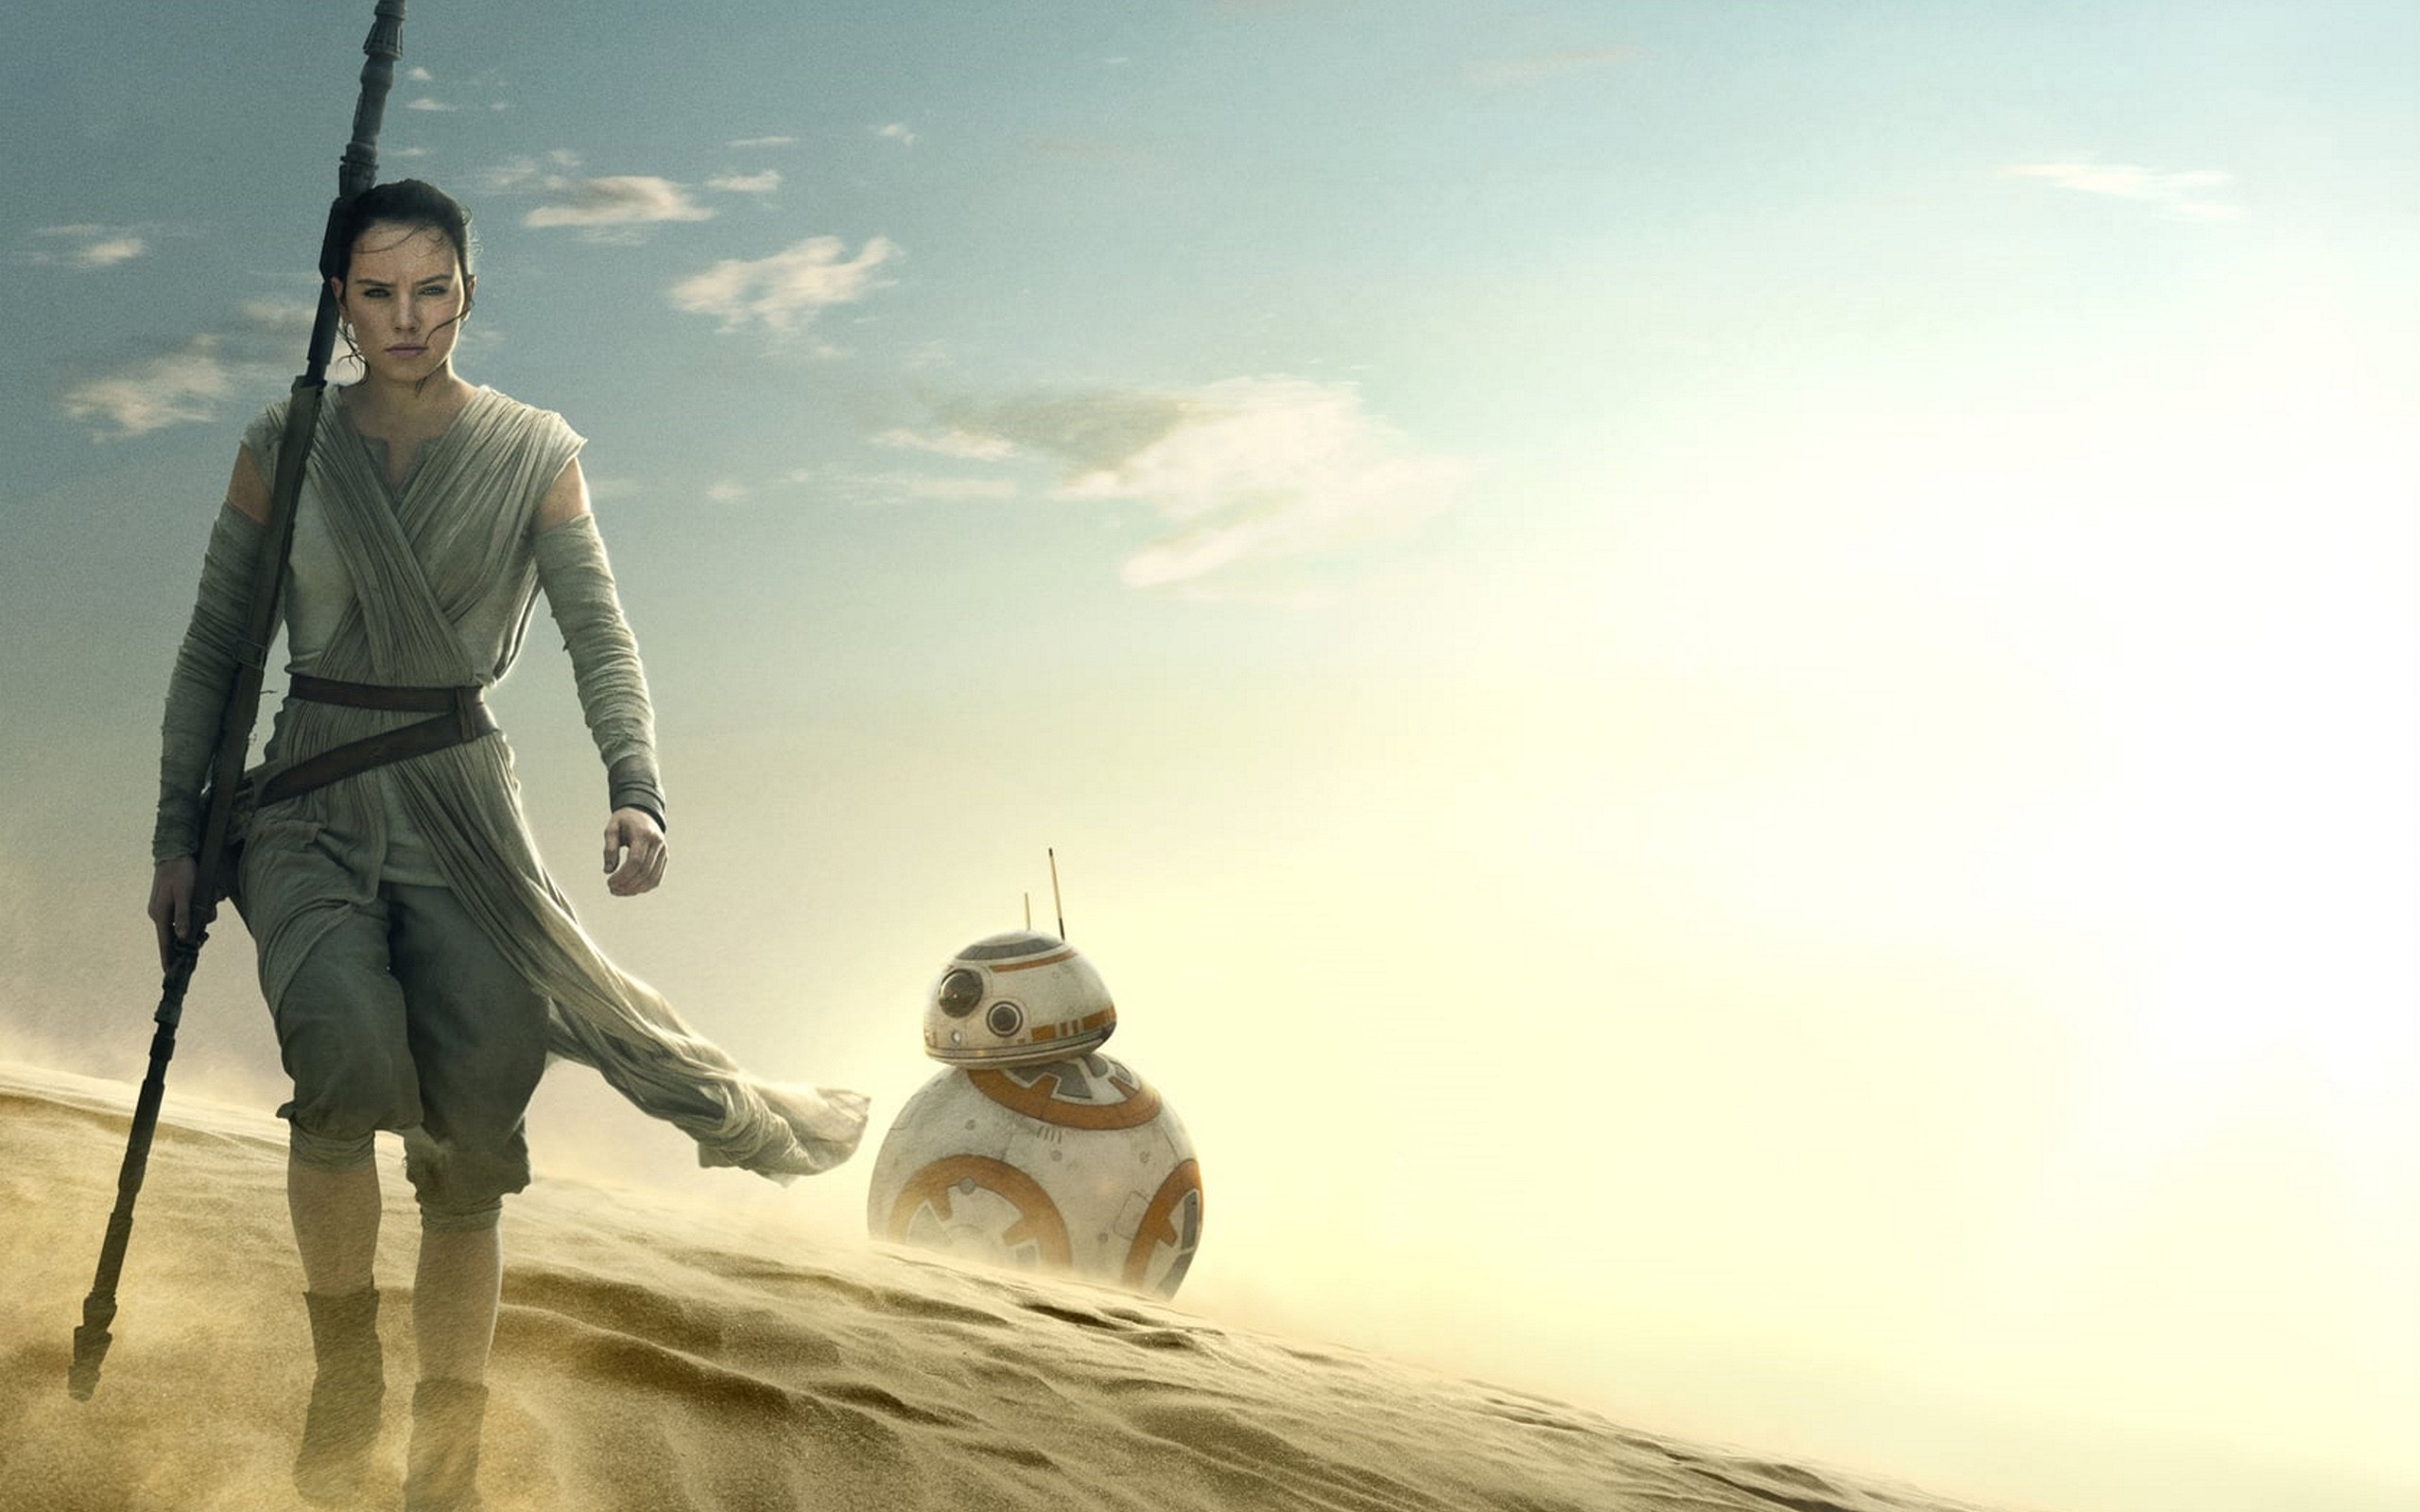 2560x1600 Rey images Rey and BB-8 HD wallpaper and background photos